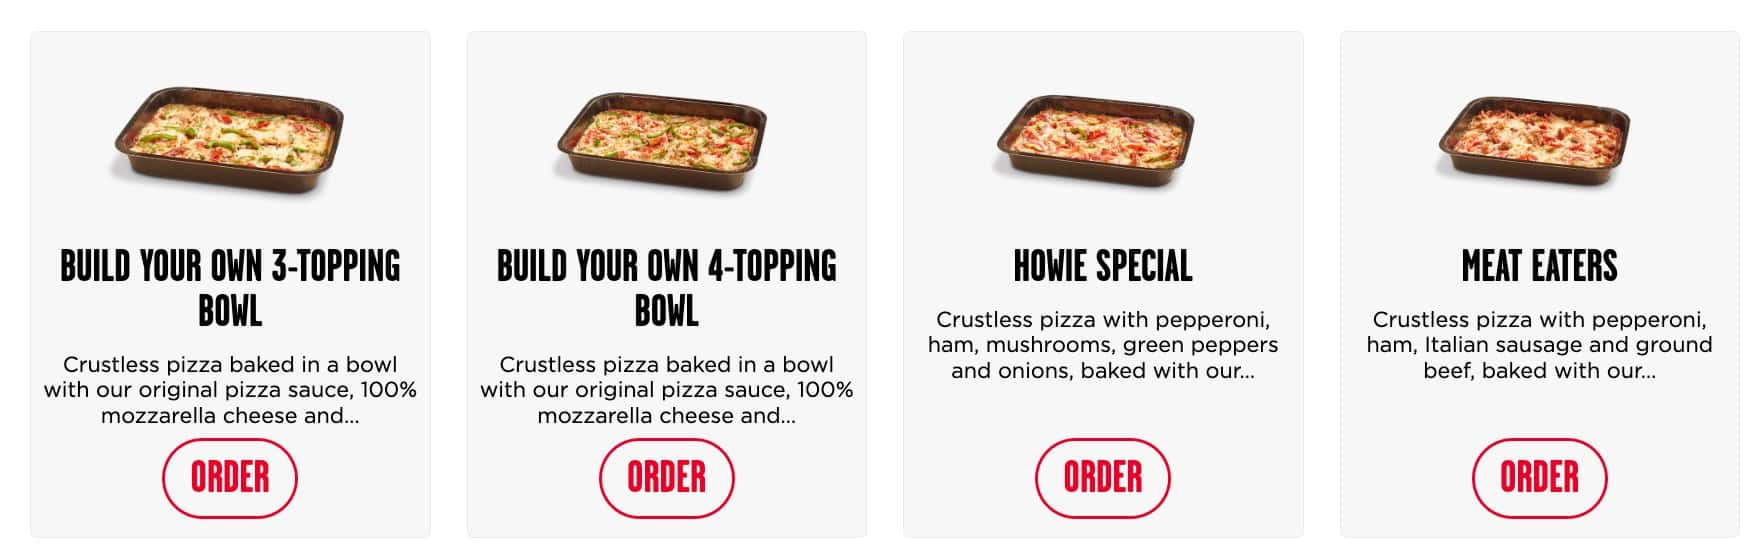 Hungry Howie's Pizza Bowls Menu